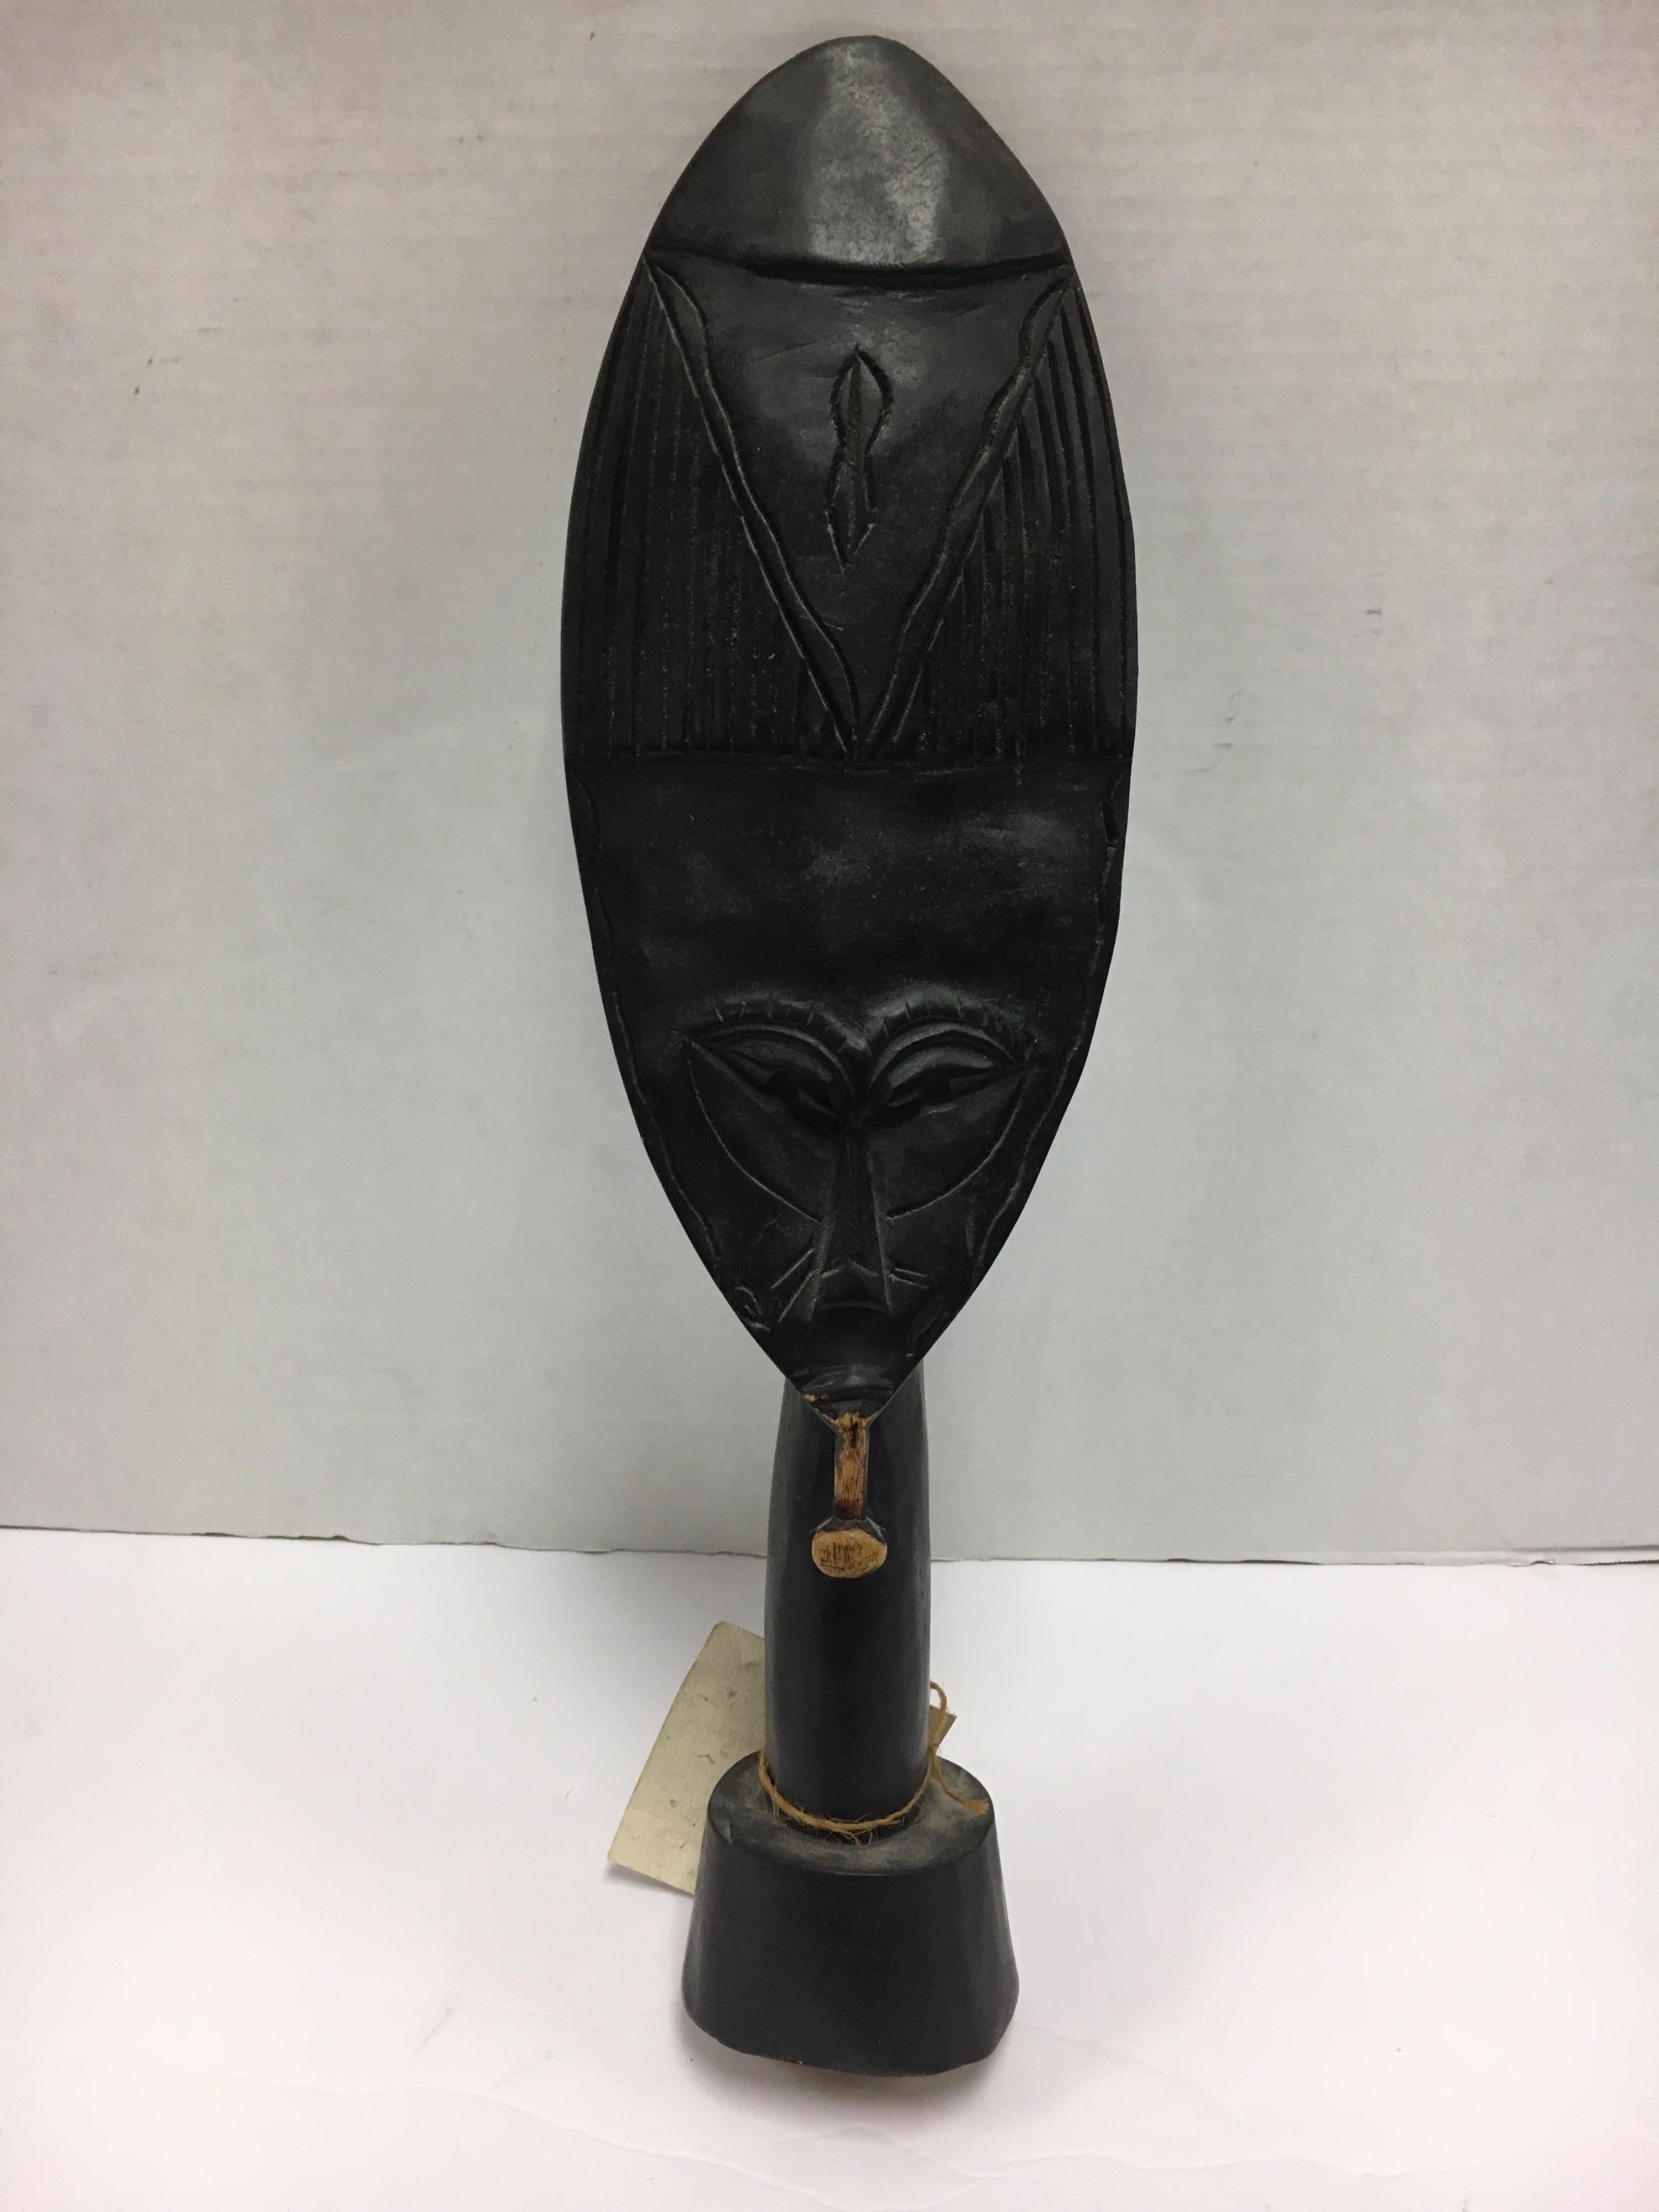 Coveted decorative African hand carved wood sculpture with graphic elements, circa 1960s
This is a decorative item from the 1960s, it was made for export, it is not an antique tribal mask.
It was made by a master carver from a single piece of wood